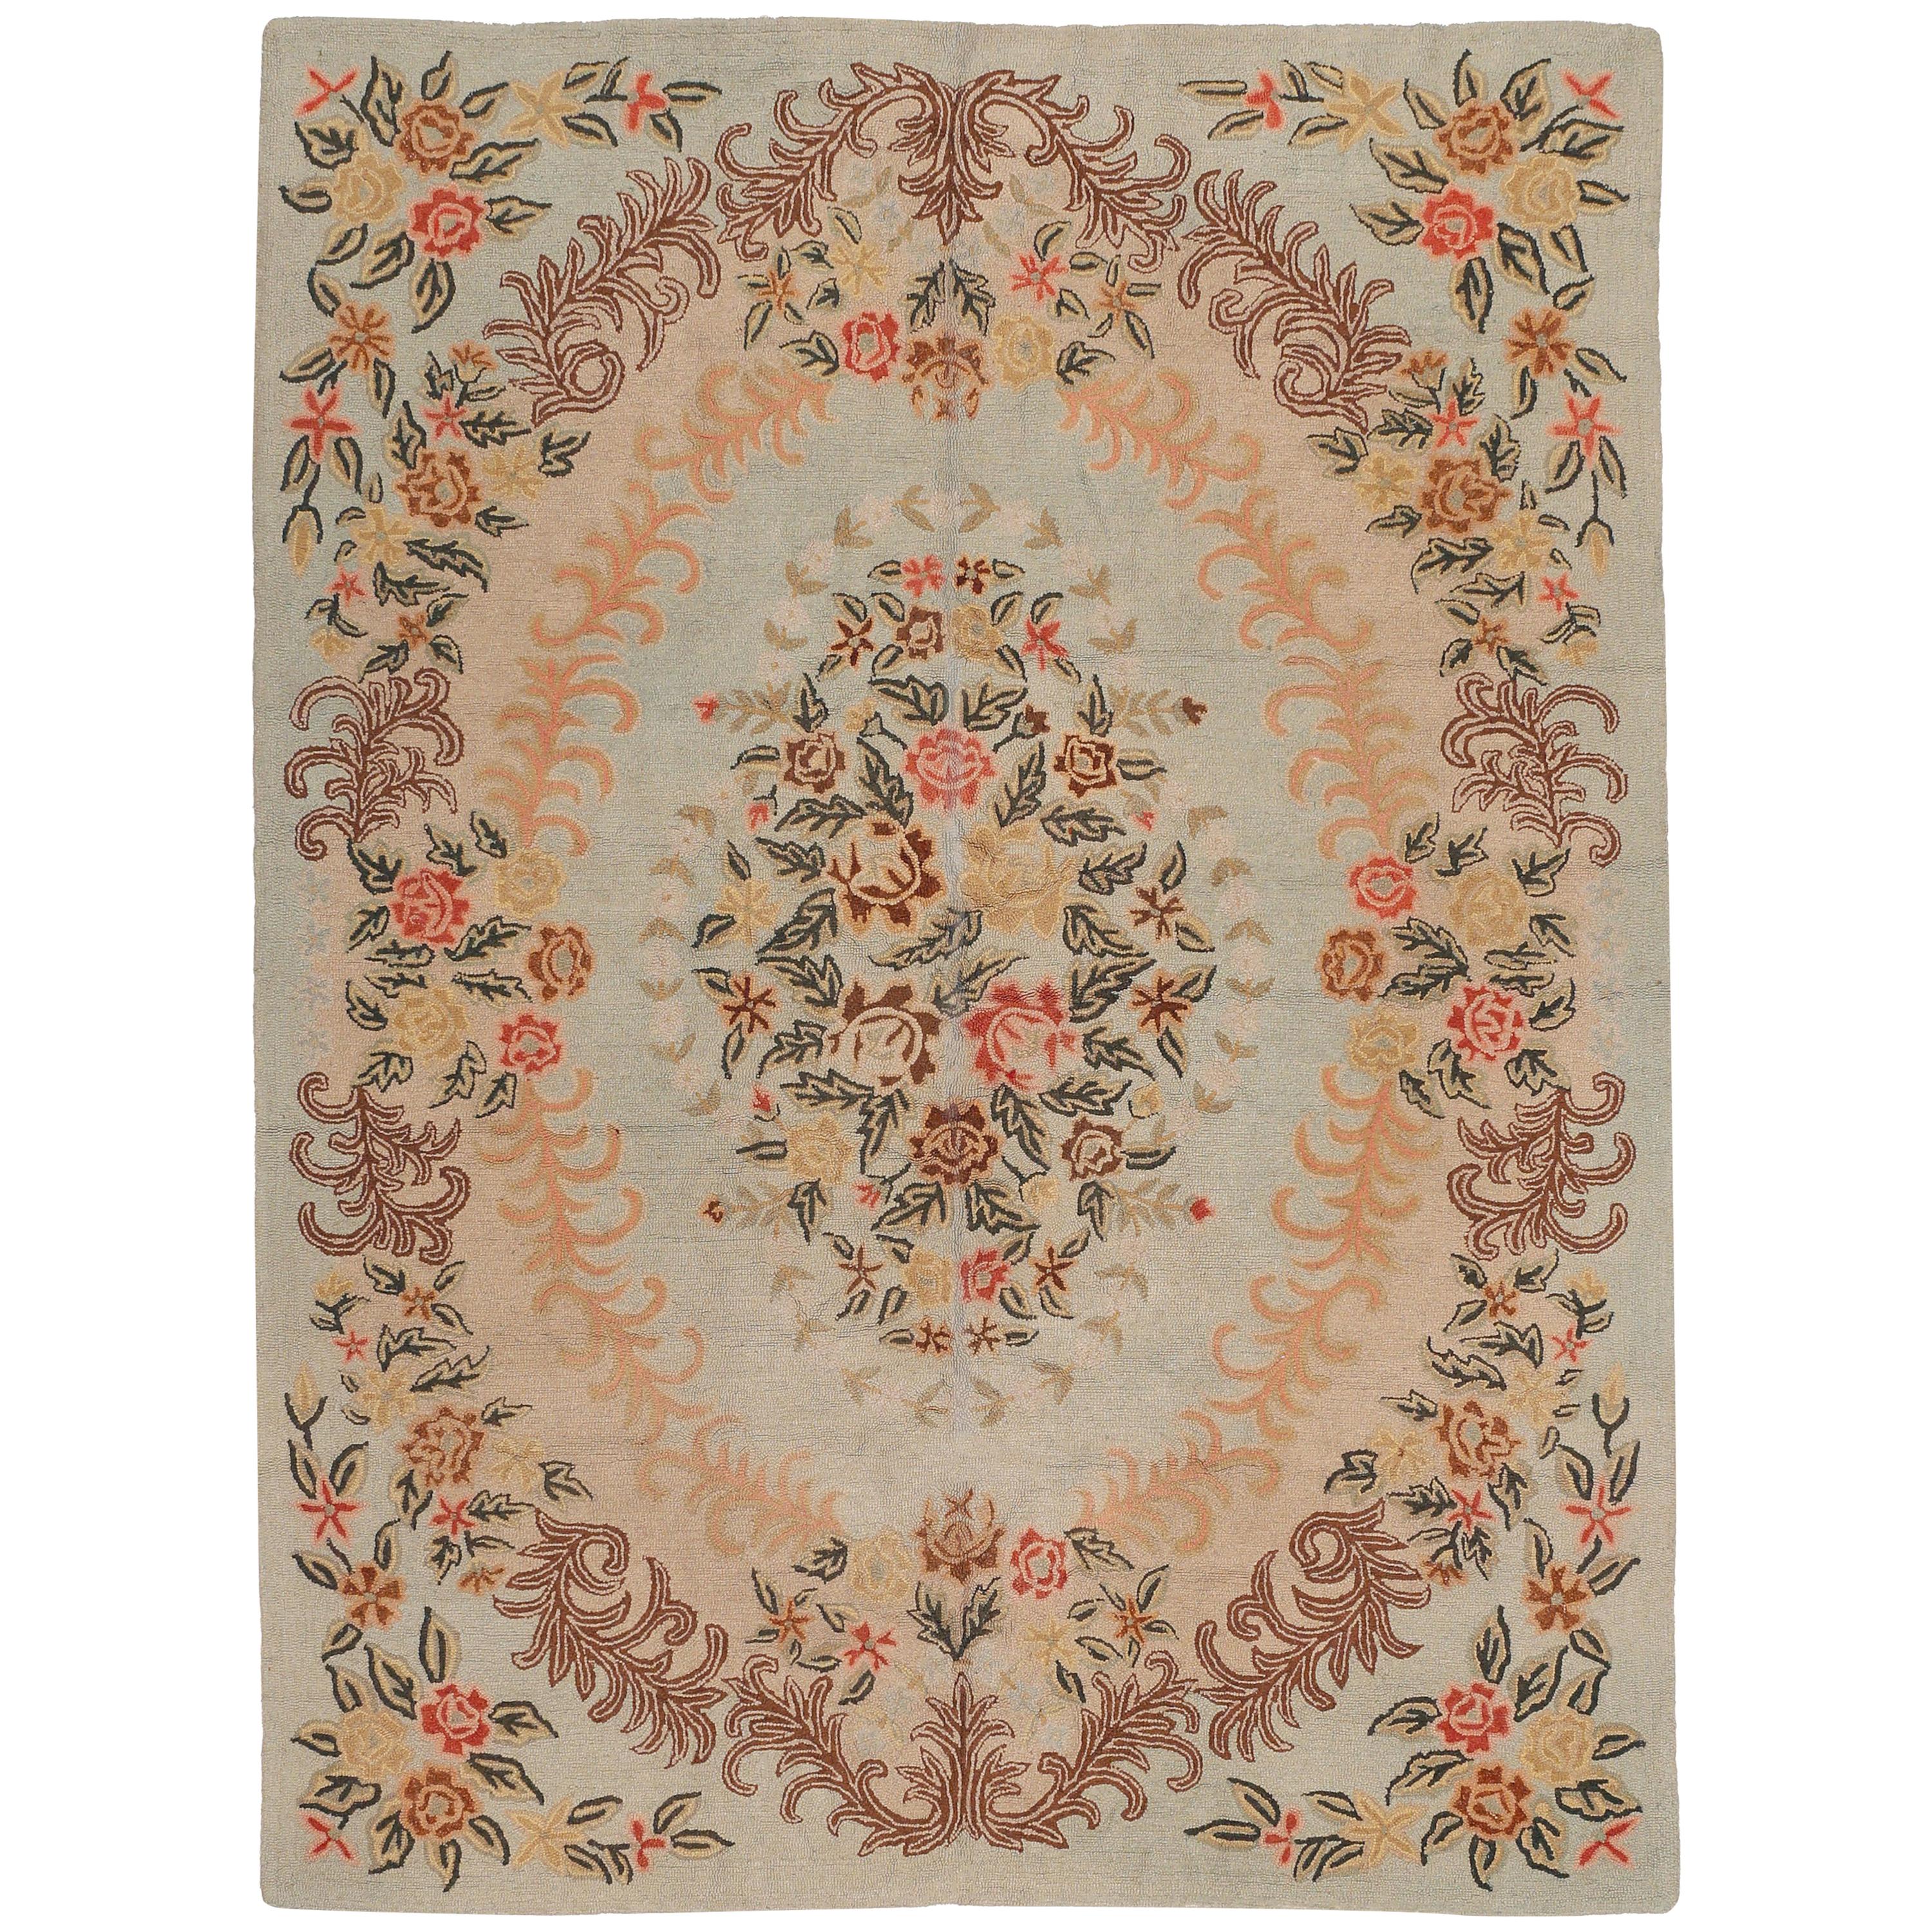 Room Size American Hooked Rug with Soft Colors